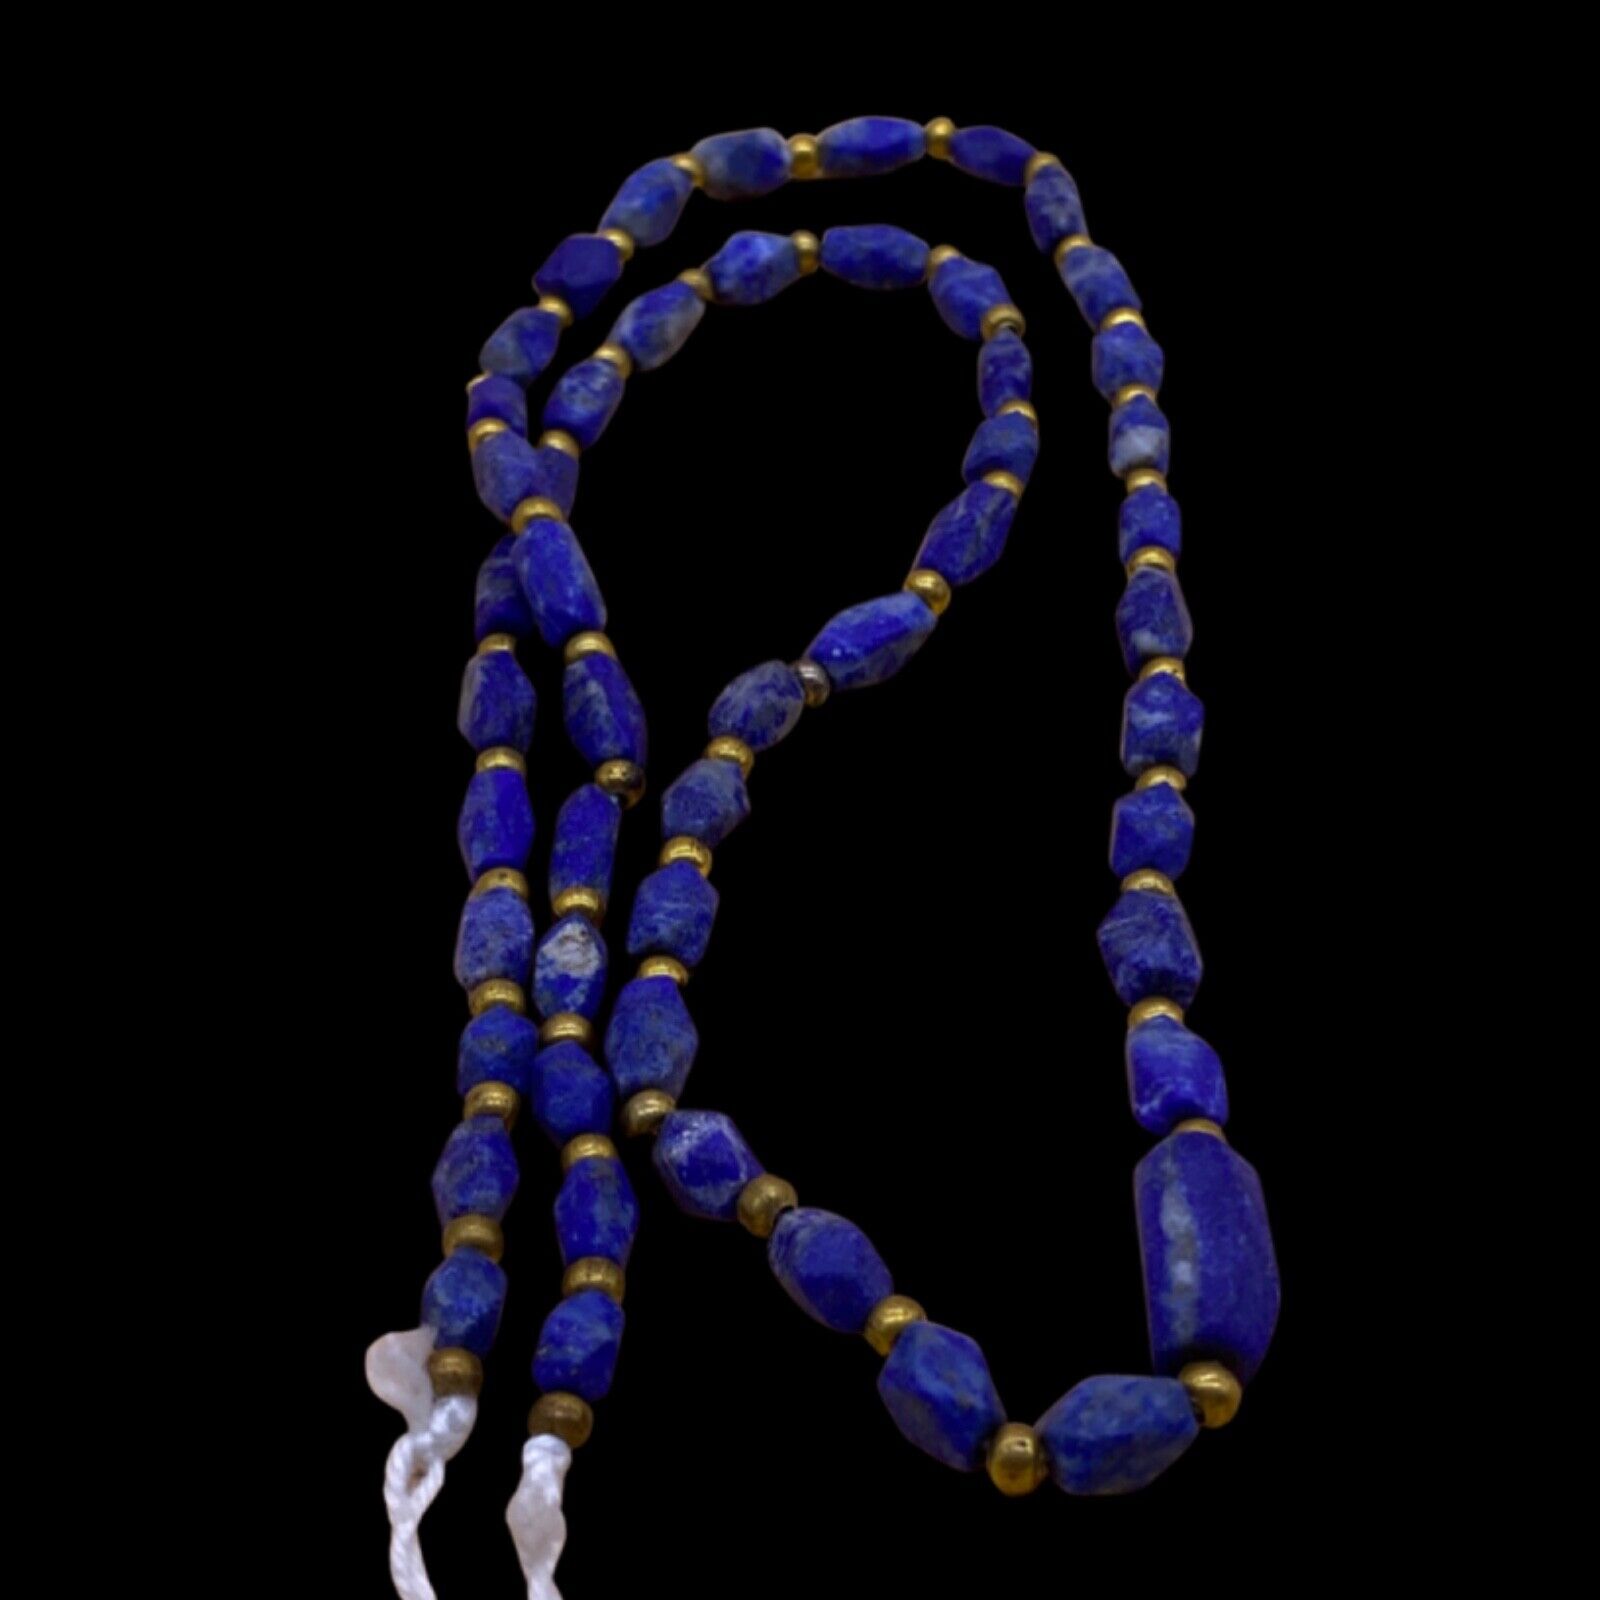 VINTAGE AFGHANISTAN LAPIS BEADS NECKLACE WITH GOLD GILDED BEADS